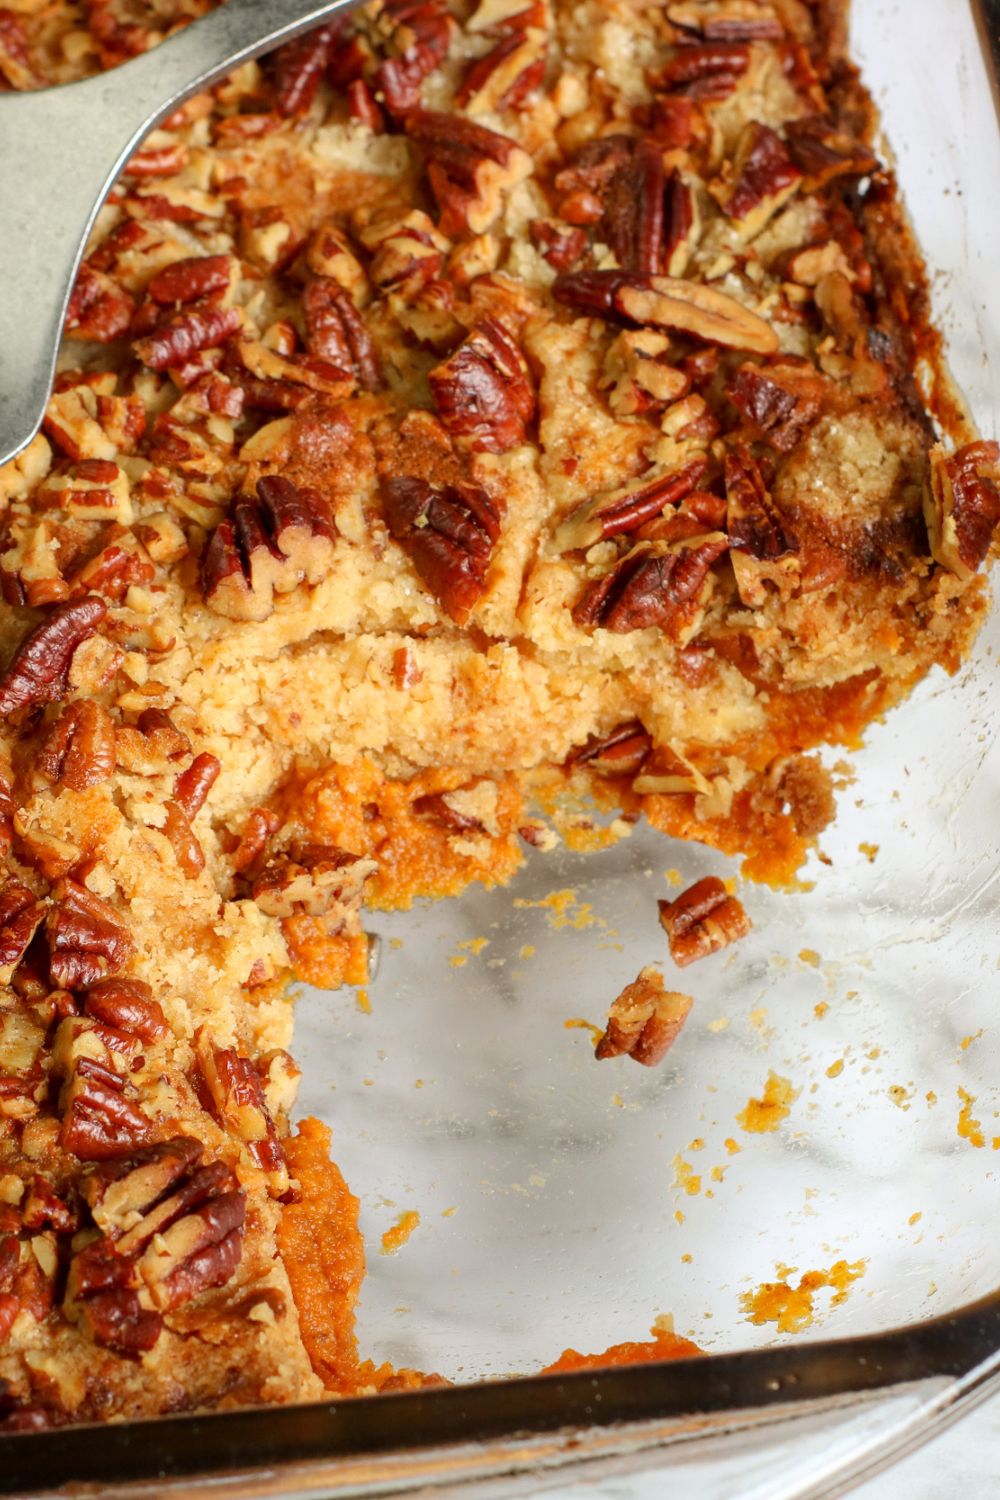 Baked pumpkin pecan cake in a baking dish with a piece taken out